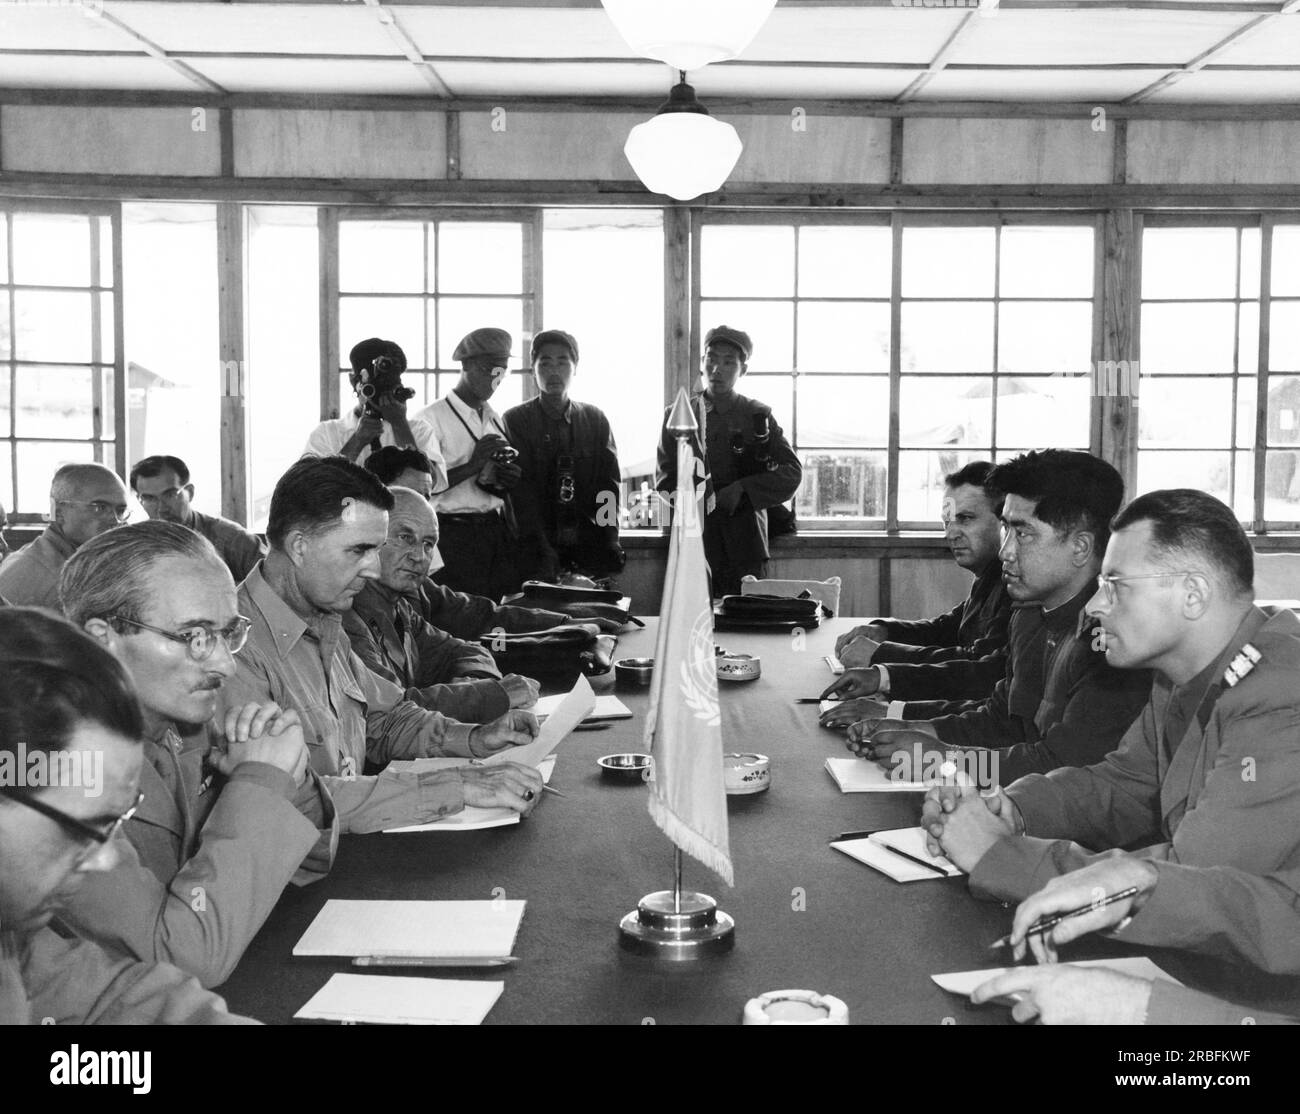 Panmunjom, Korea:  August 1, 1953 Neutral nations staff of Swiss, Swedish, Polish, and Czechoslovakian representatives meet for the first time in the building built for the signing of the Korean Armistice. Stock Photo